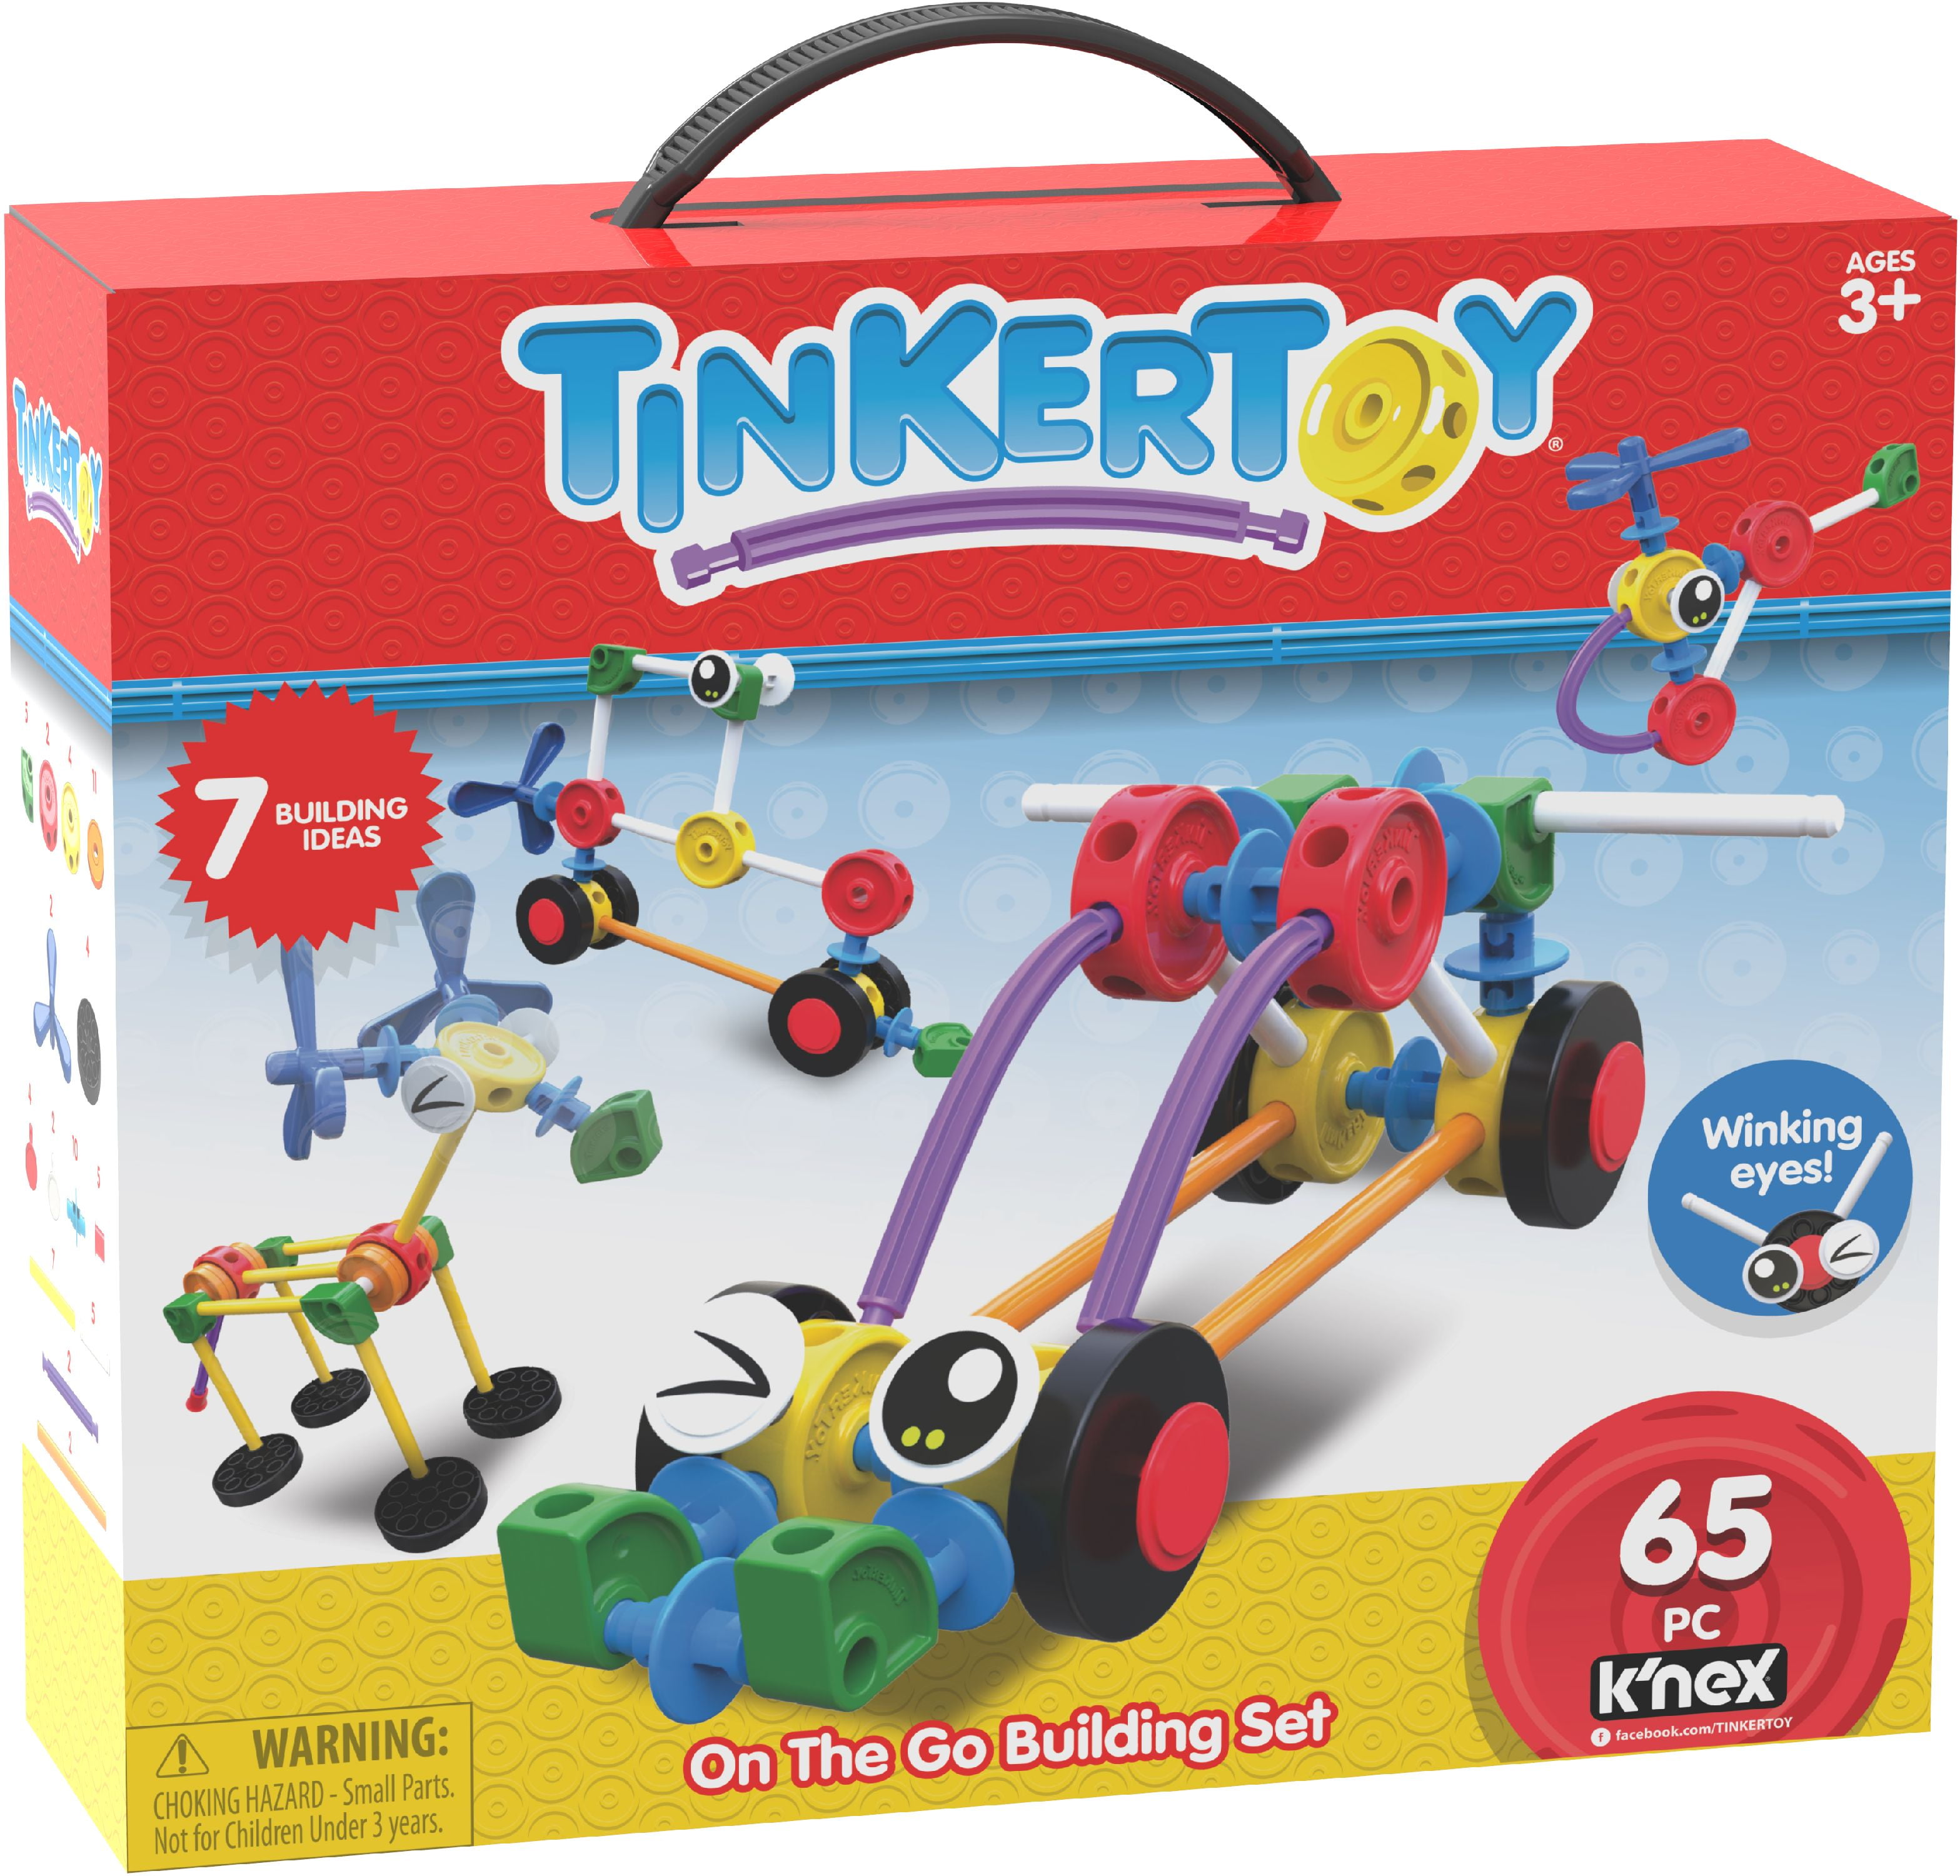 Create your own kit  Toyops,Inc.- TOPS in TOYs that Teach!